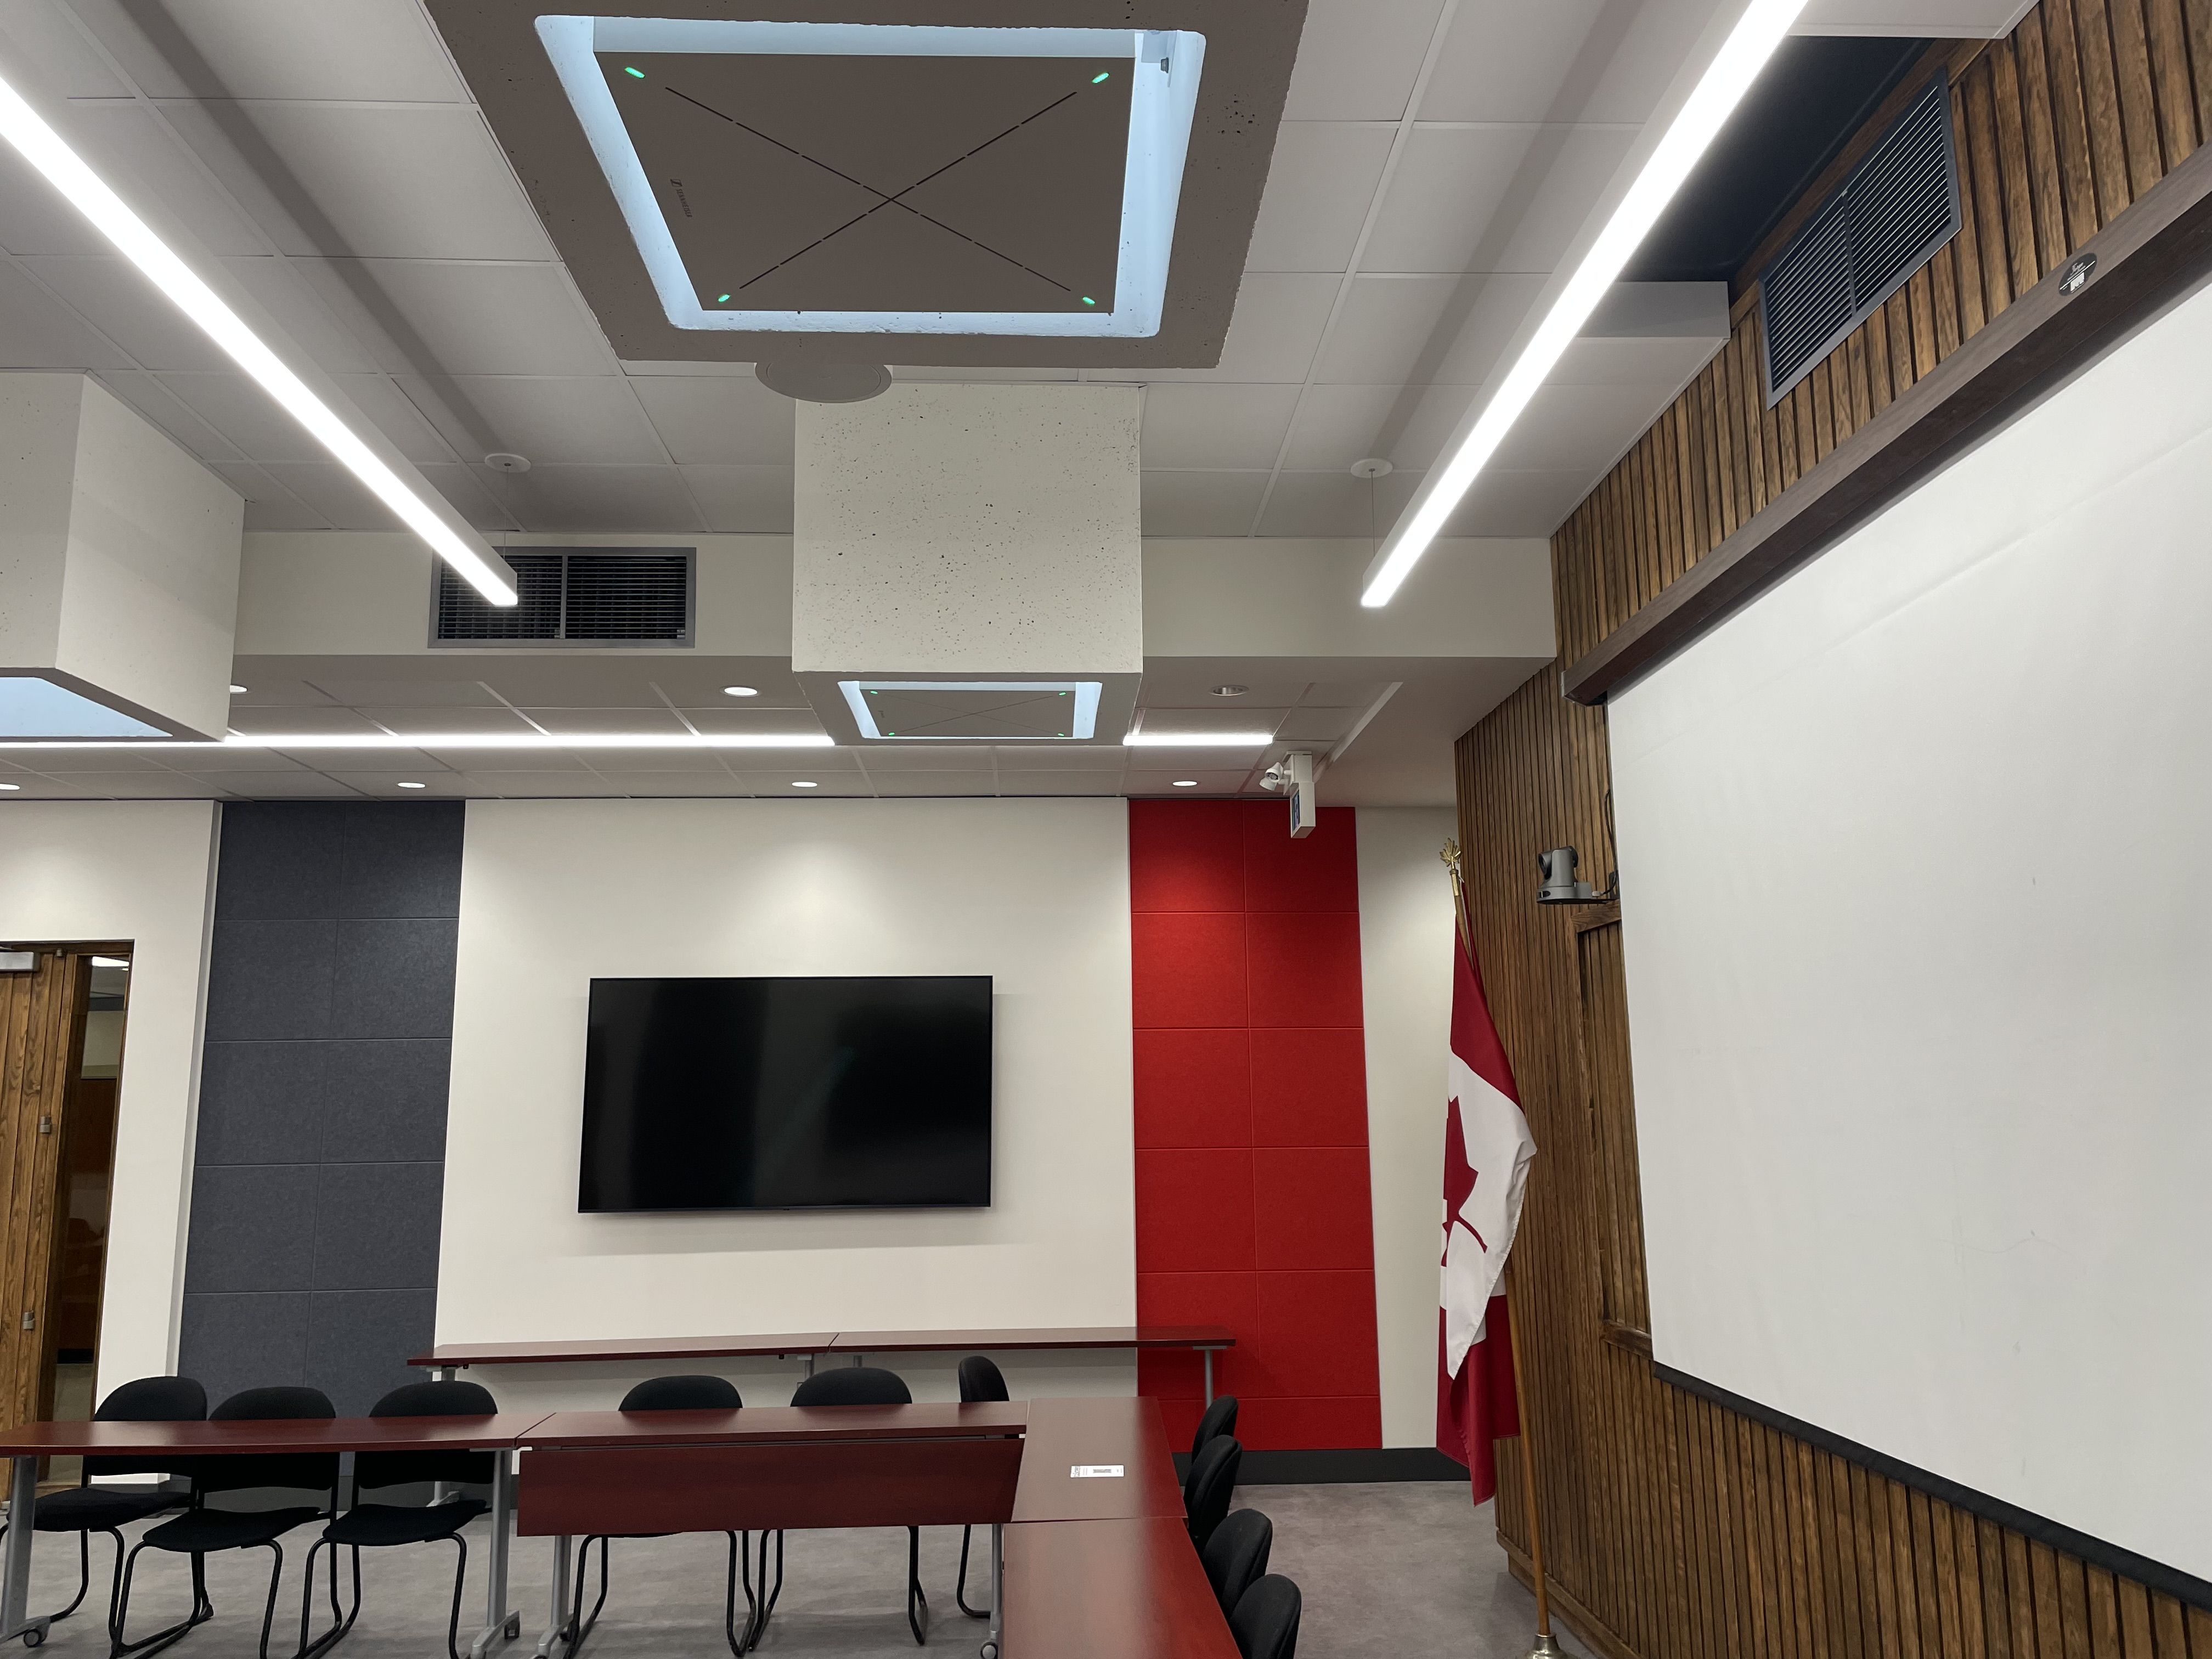 The university selected Sennheiser's TeamConnect Ceiling 2 (TCC 2) microphones to create a seamless environment for Senate meetings and conferences.